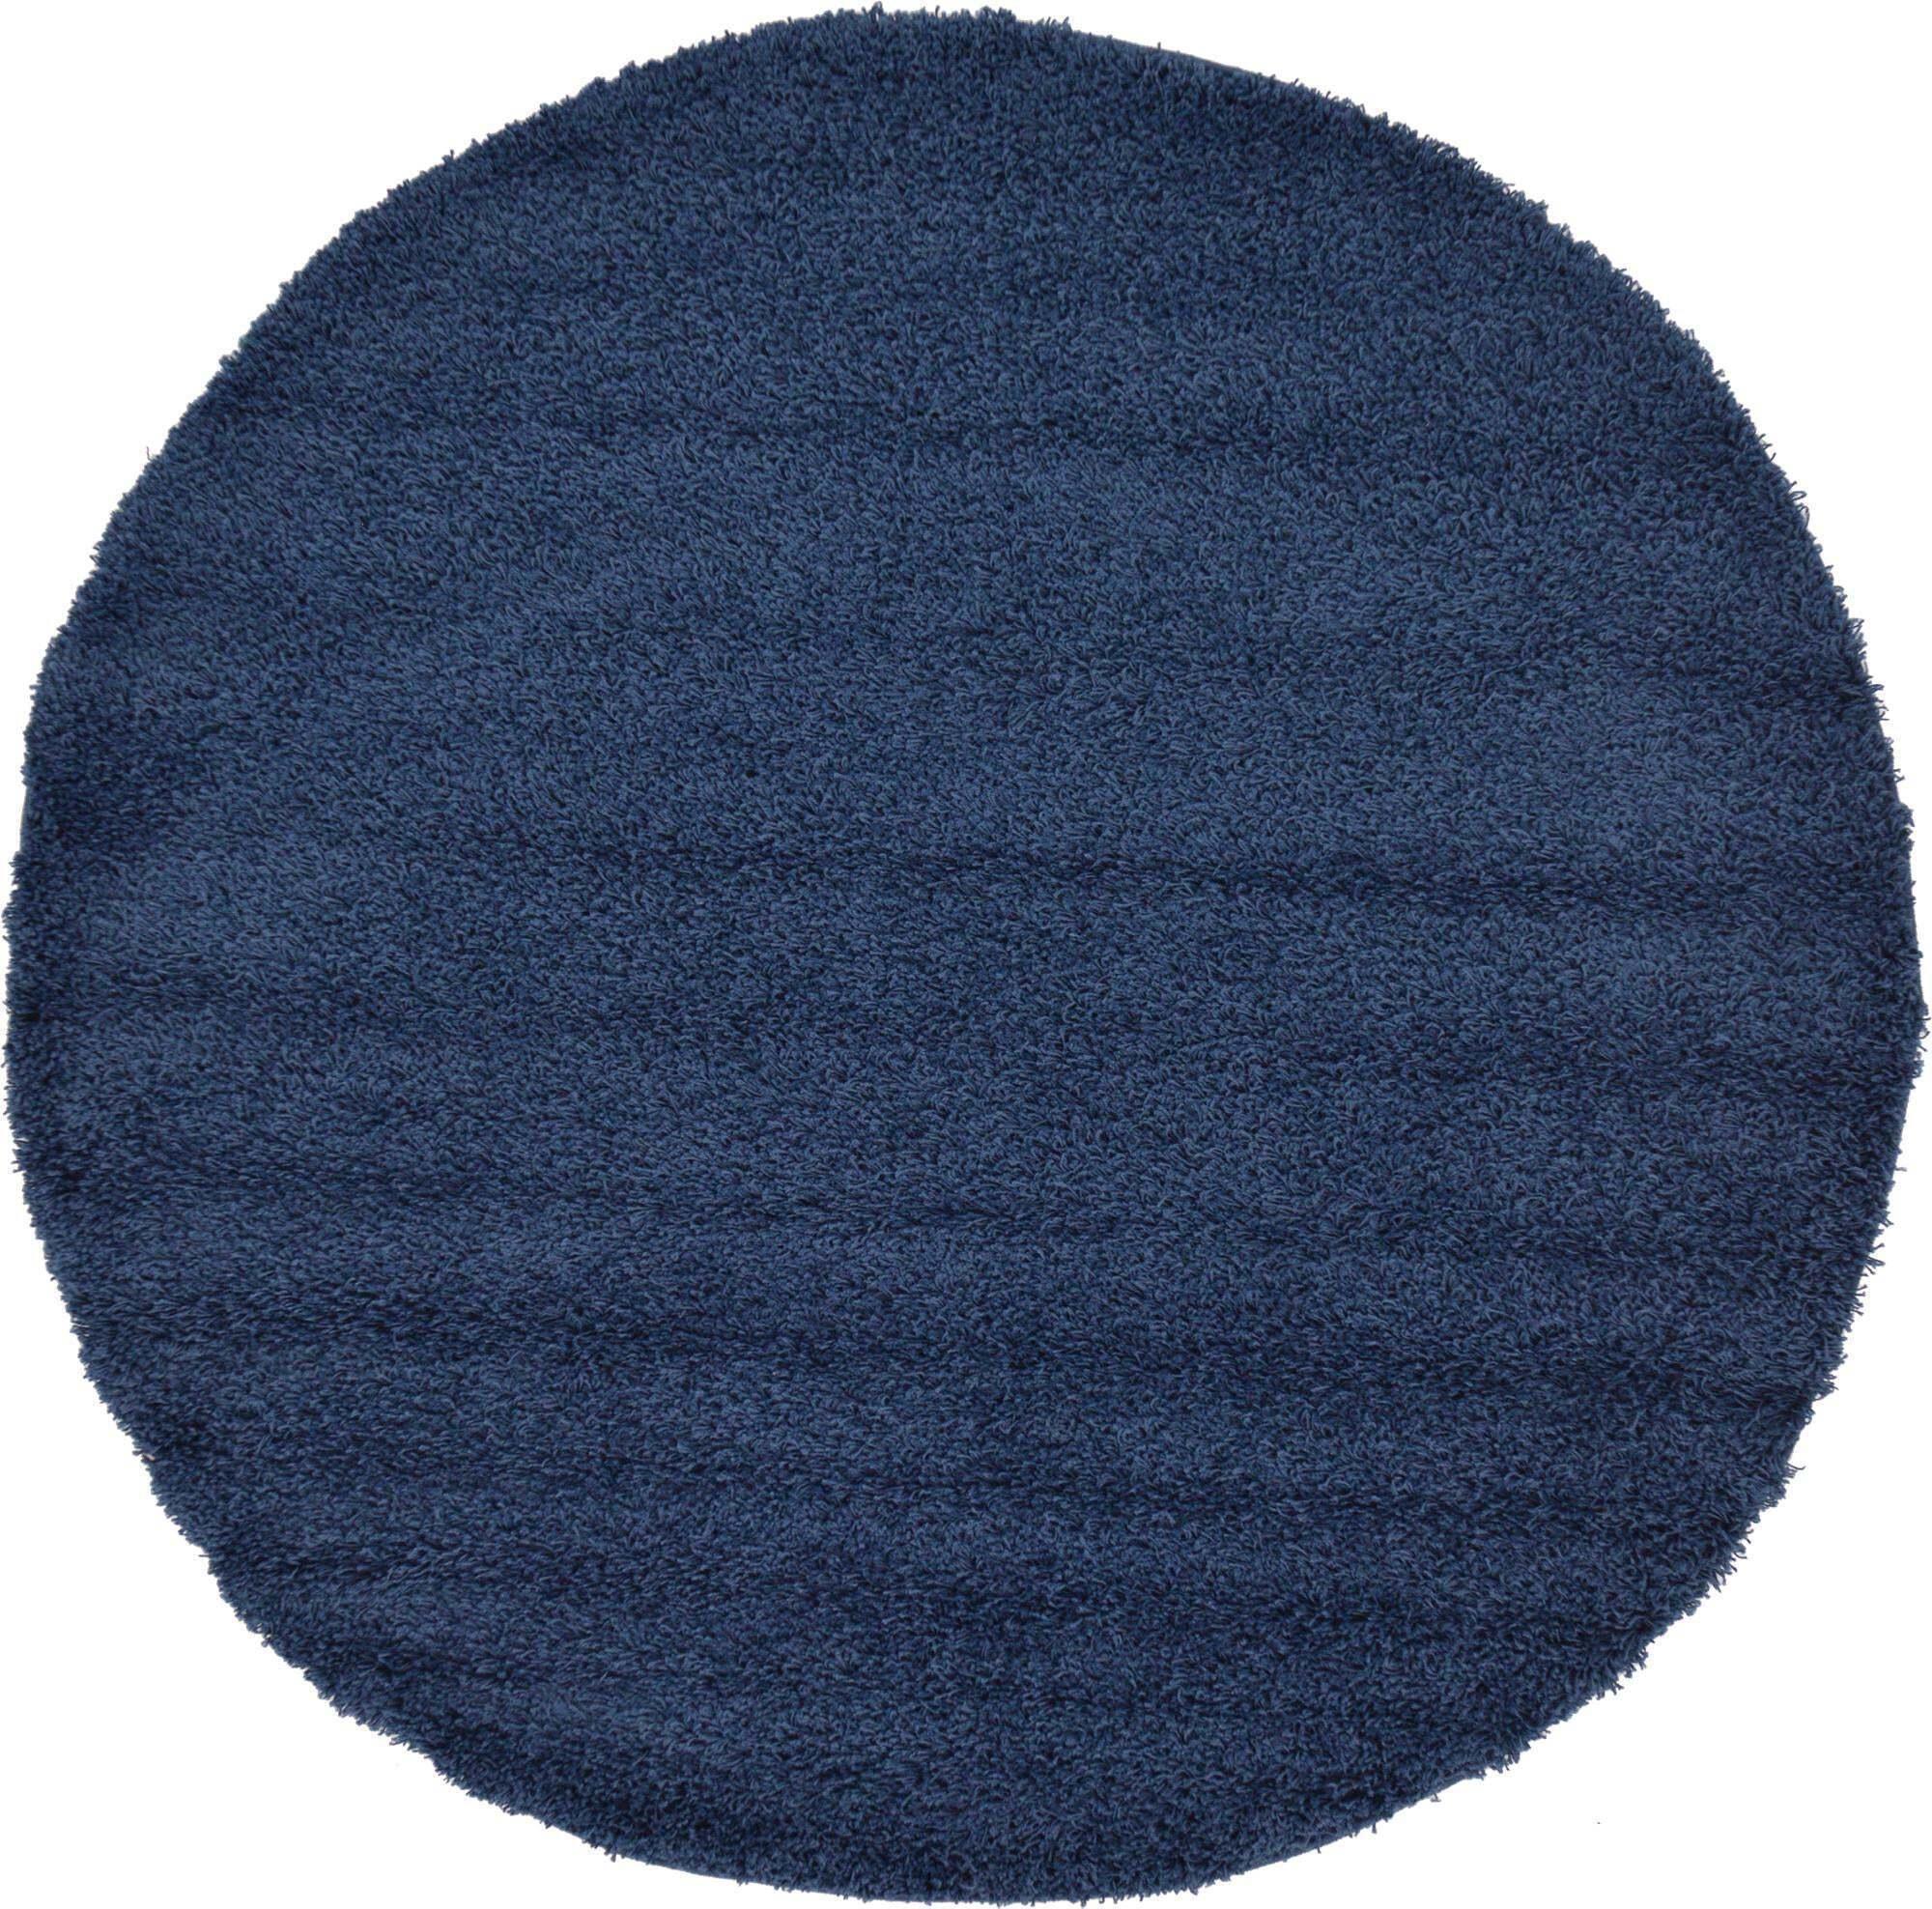 Unique Loom Indoor Rugs - Solid Shag 6 Ft Round Rug Navy Blue